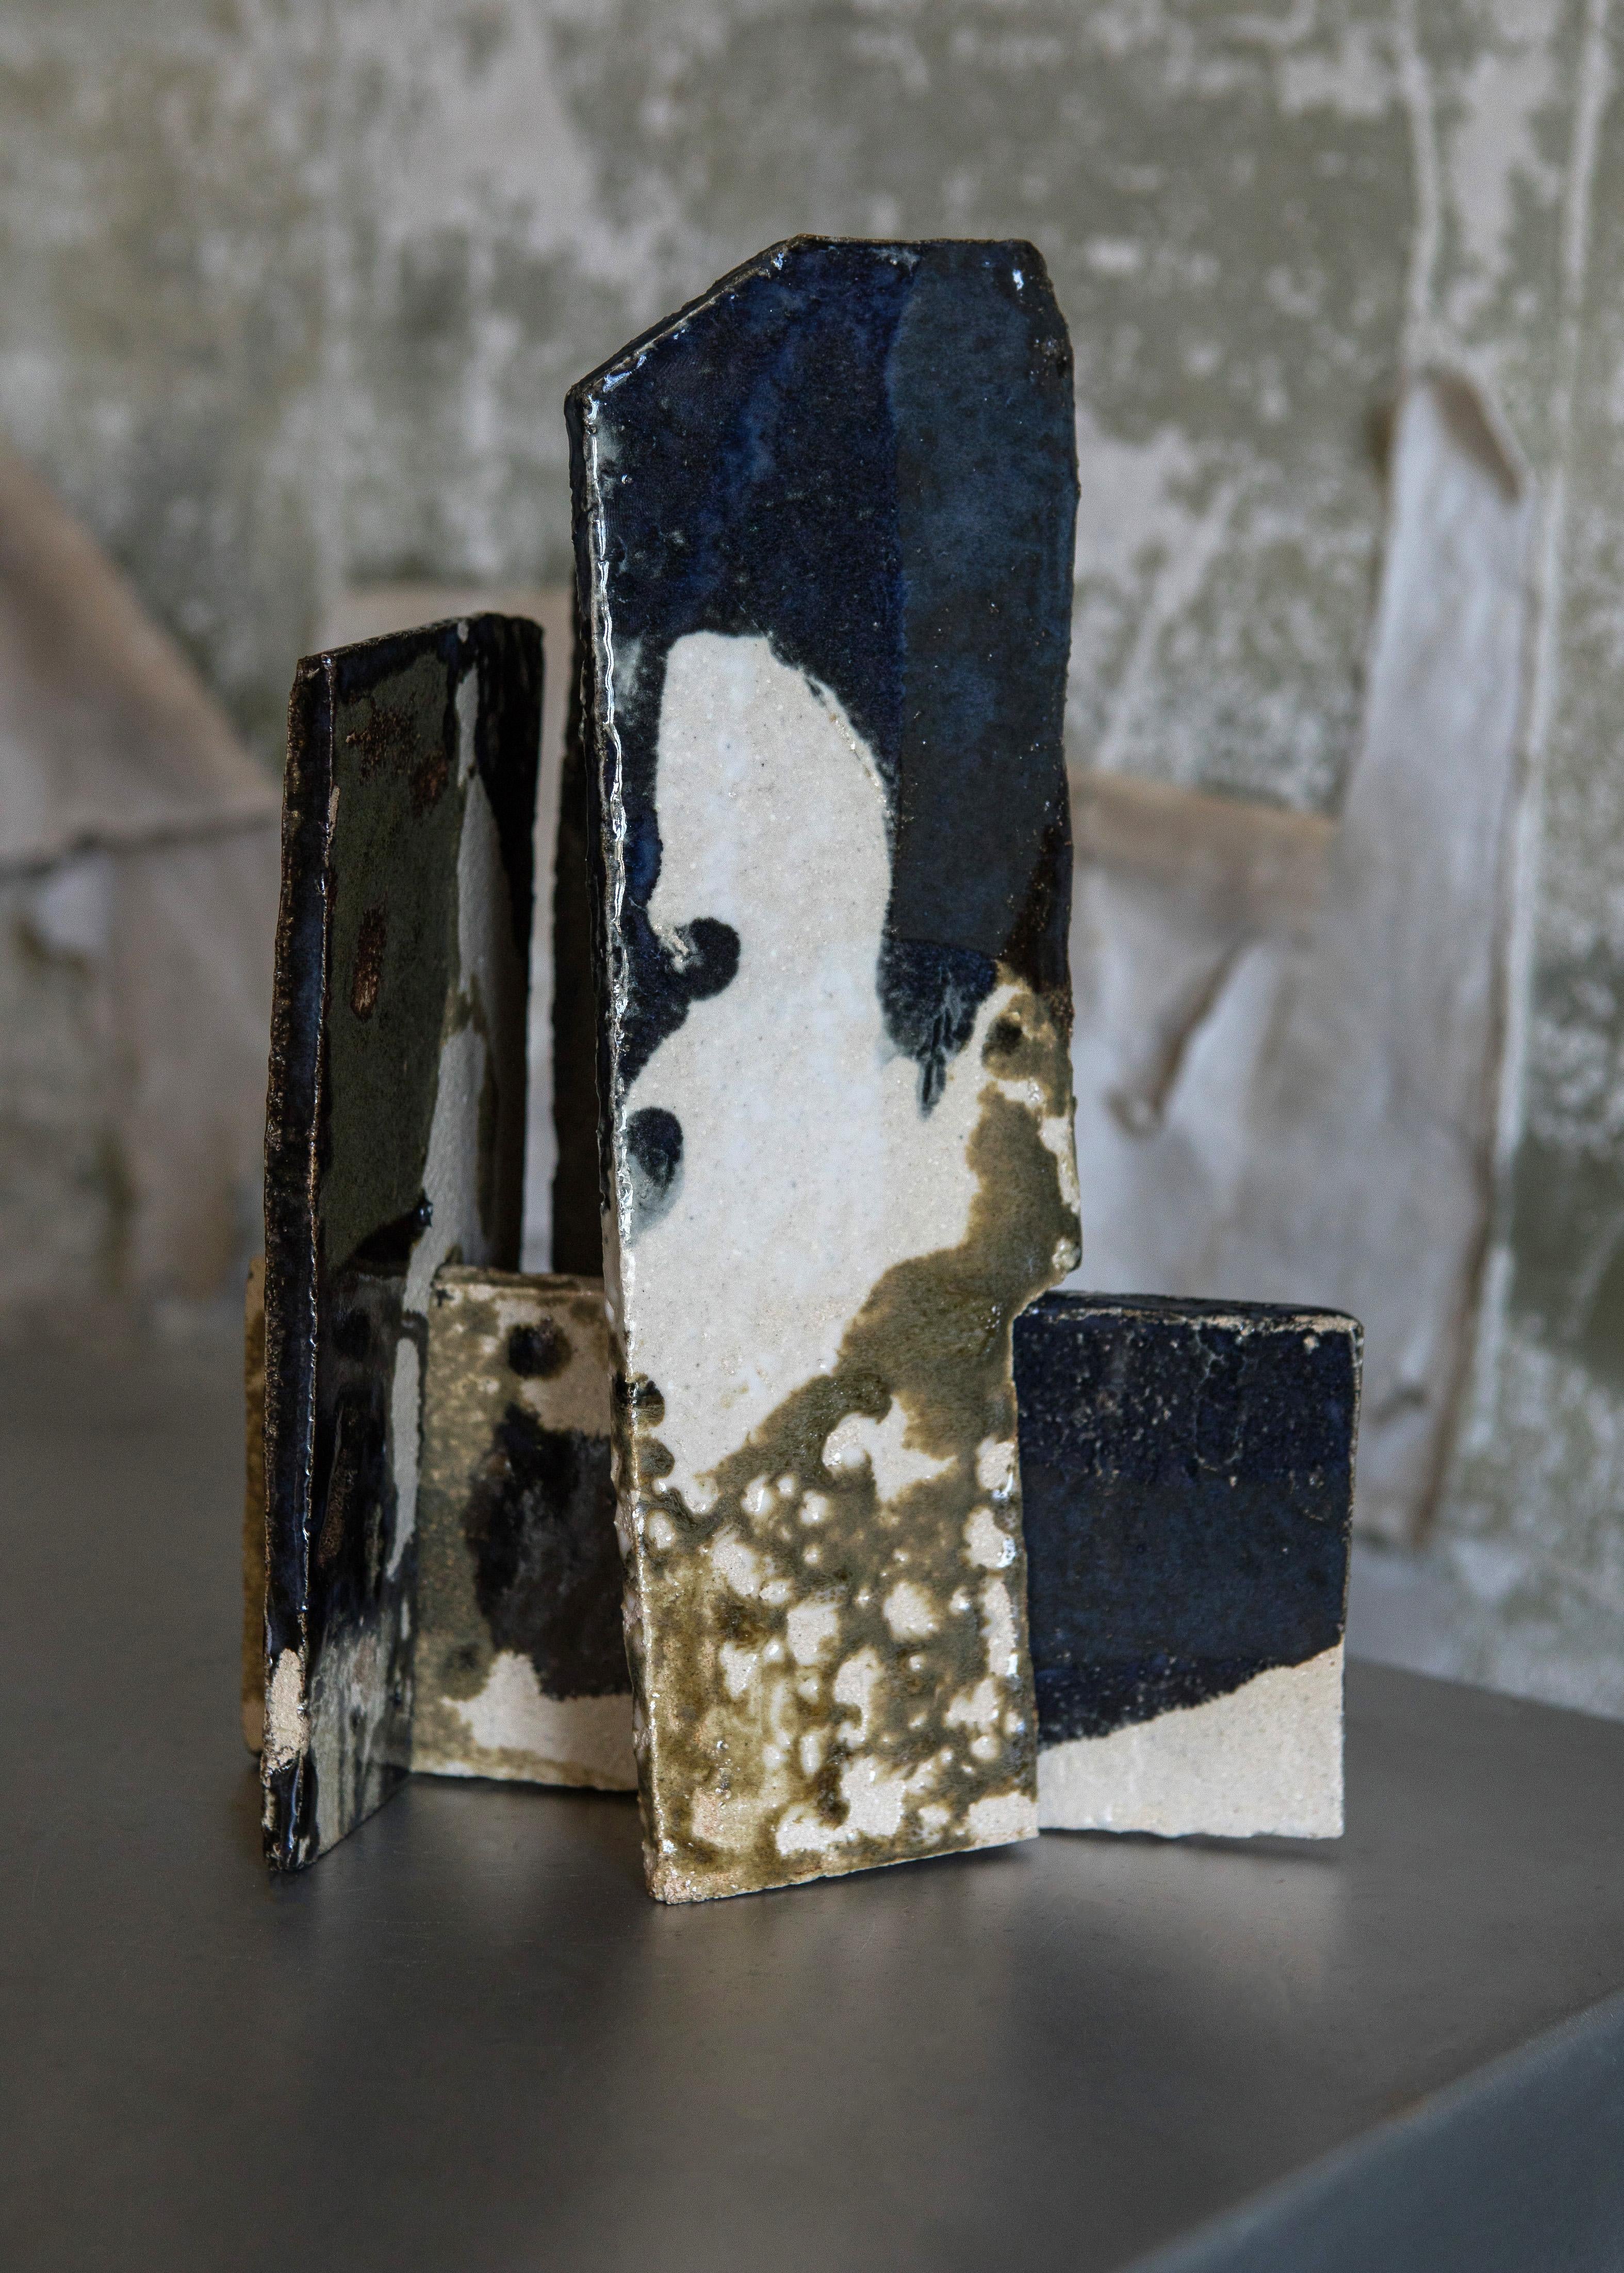 Set Of 3 Sandstone S Decorative Objects by Mylene Niedzialkowski
Unique Pieces.
Dimensions: Ø 22 x H 25,5 cm. 
Materials: Sandstone and enamel.

Modules composed of 2 or 3 glazed stoneware slabs, hand- crafted piece by piece to create a unique